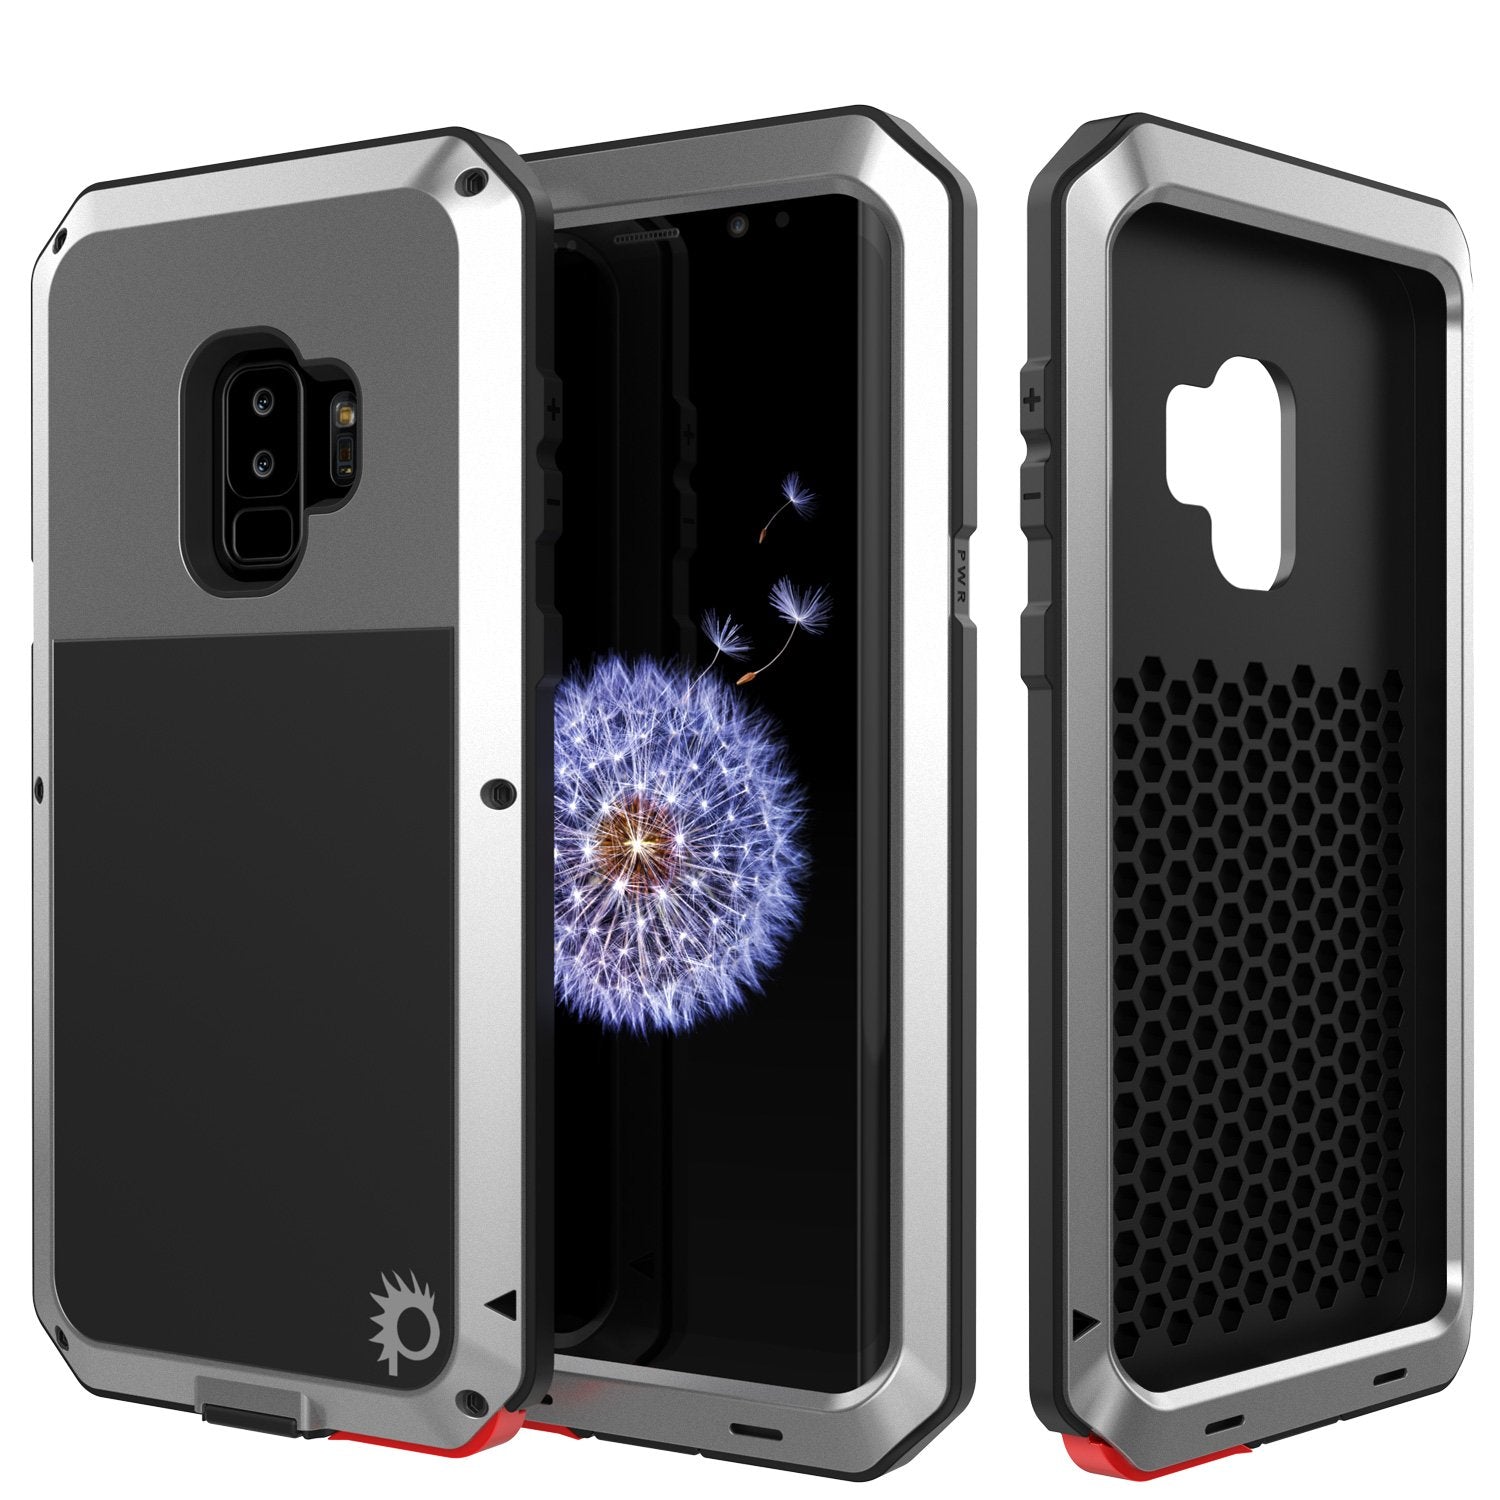 Galaxy S9 Plus Metal Case, Heavy Duty Military Grade Rugged Armor Cover [shock proof] Hybrid Full Body Hard Aluminum & TPU Design [non slip] W/ Prime Drop Protection for Samsung Galaxy S9 Plus [Silver]